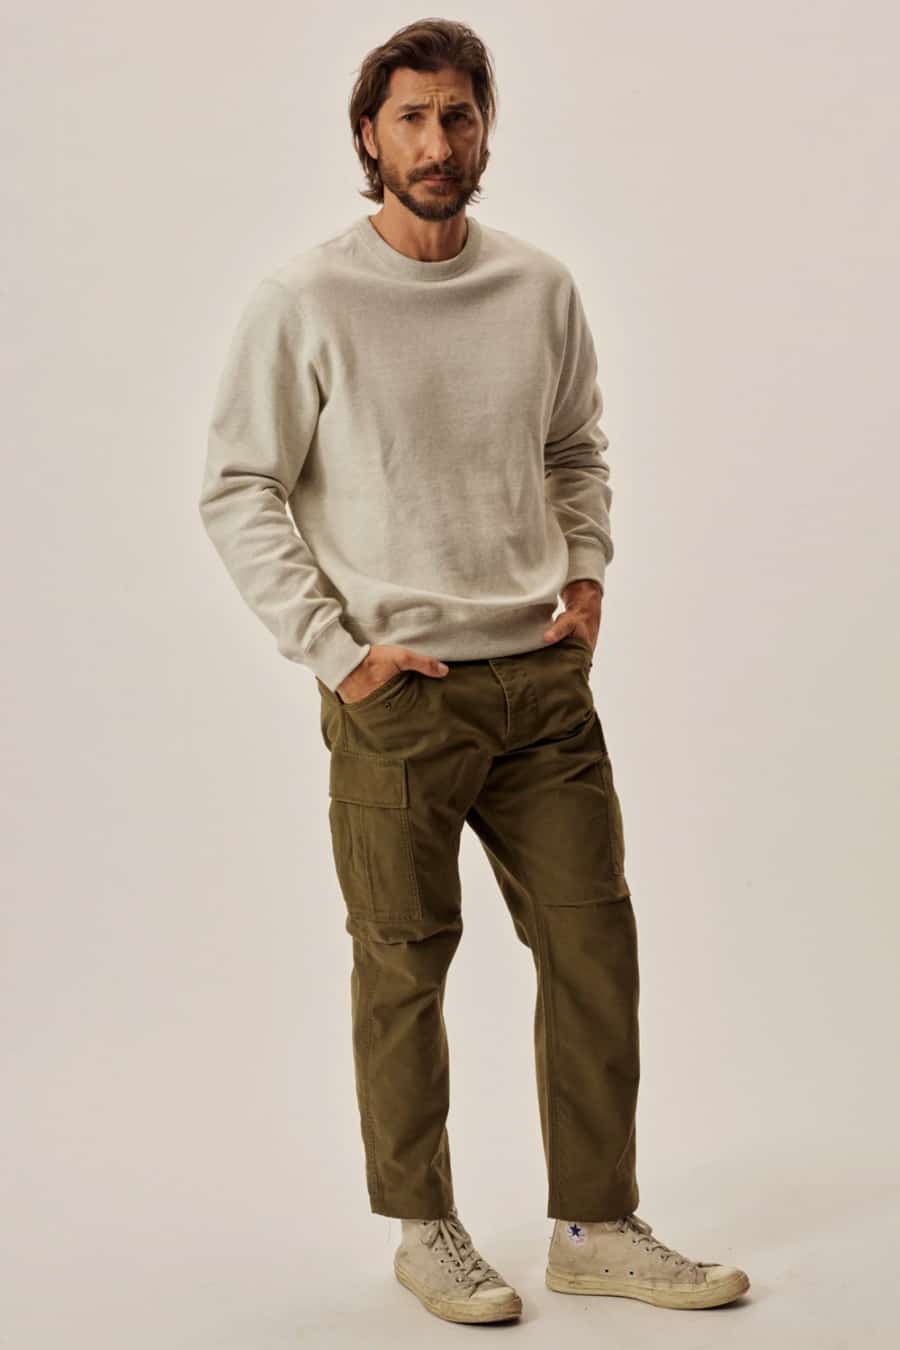 Men's olive green cargo pants, grey sweatshirt and canvas high-top sneakers outfit